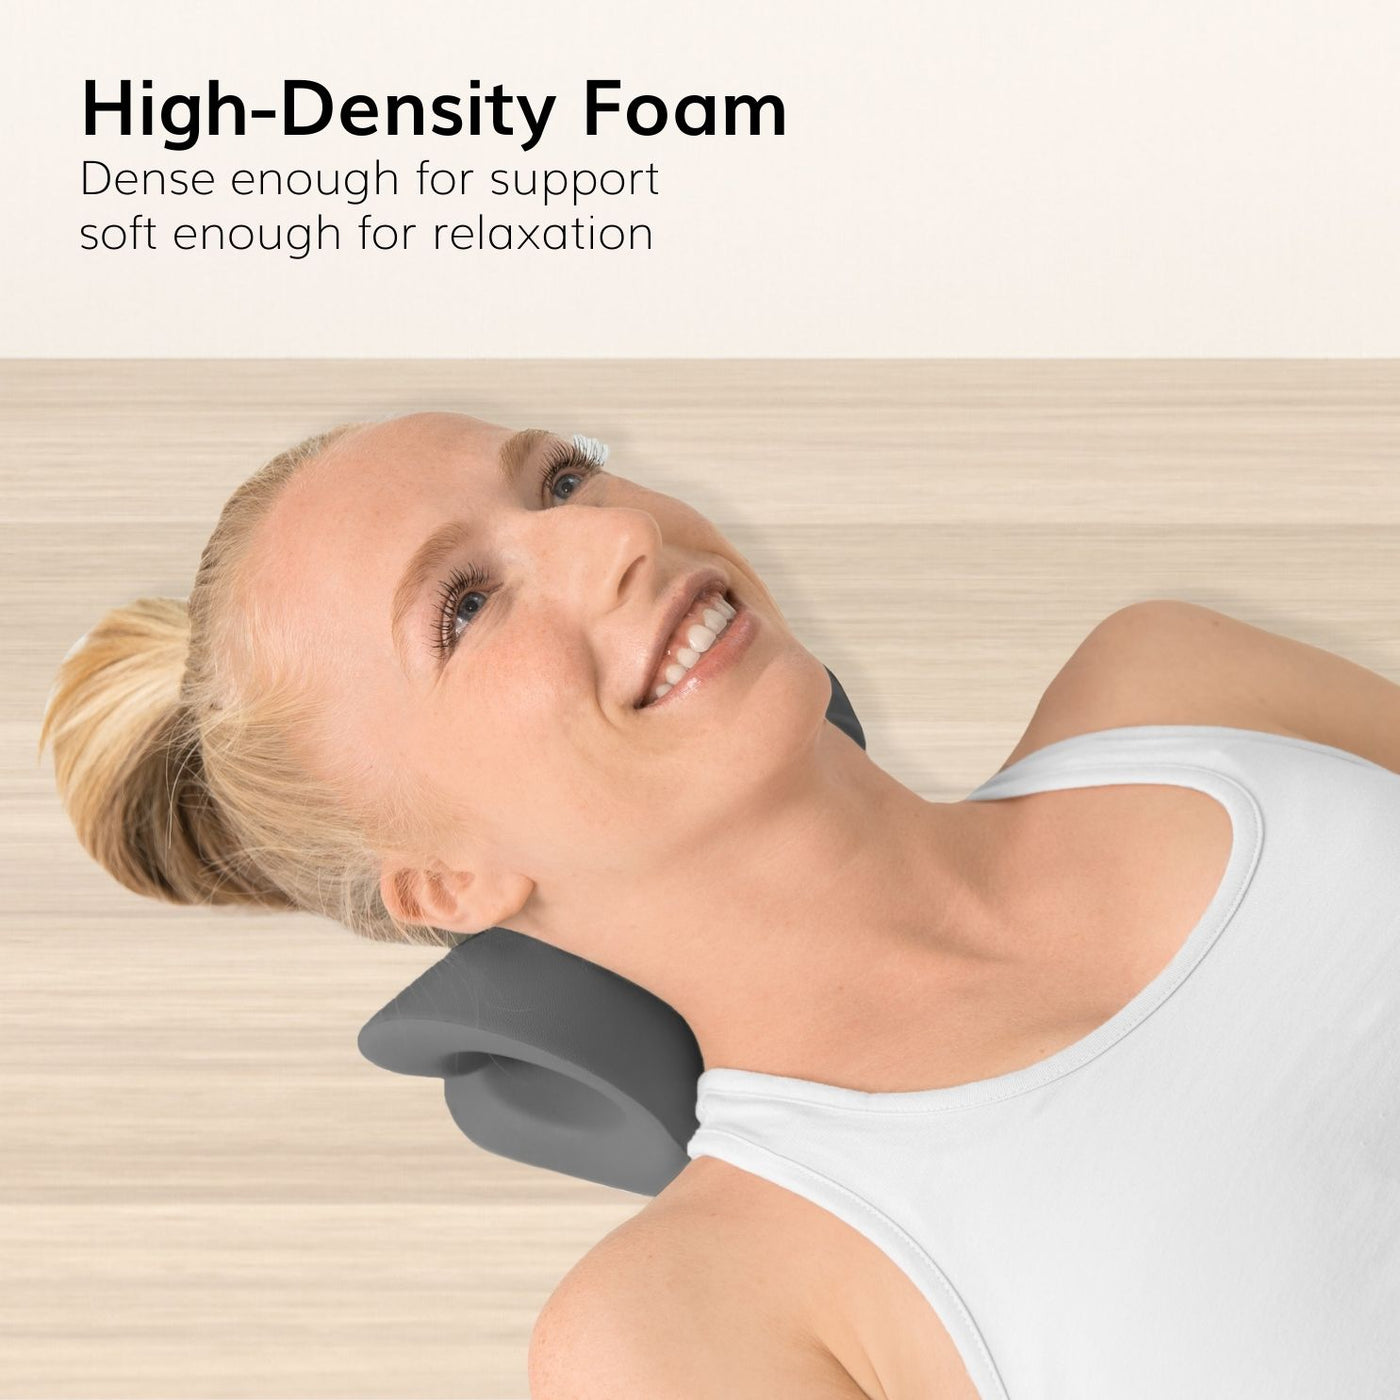 The high density foam neck stretcher is strong enough for support but soft enough for relaxation